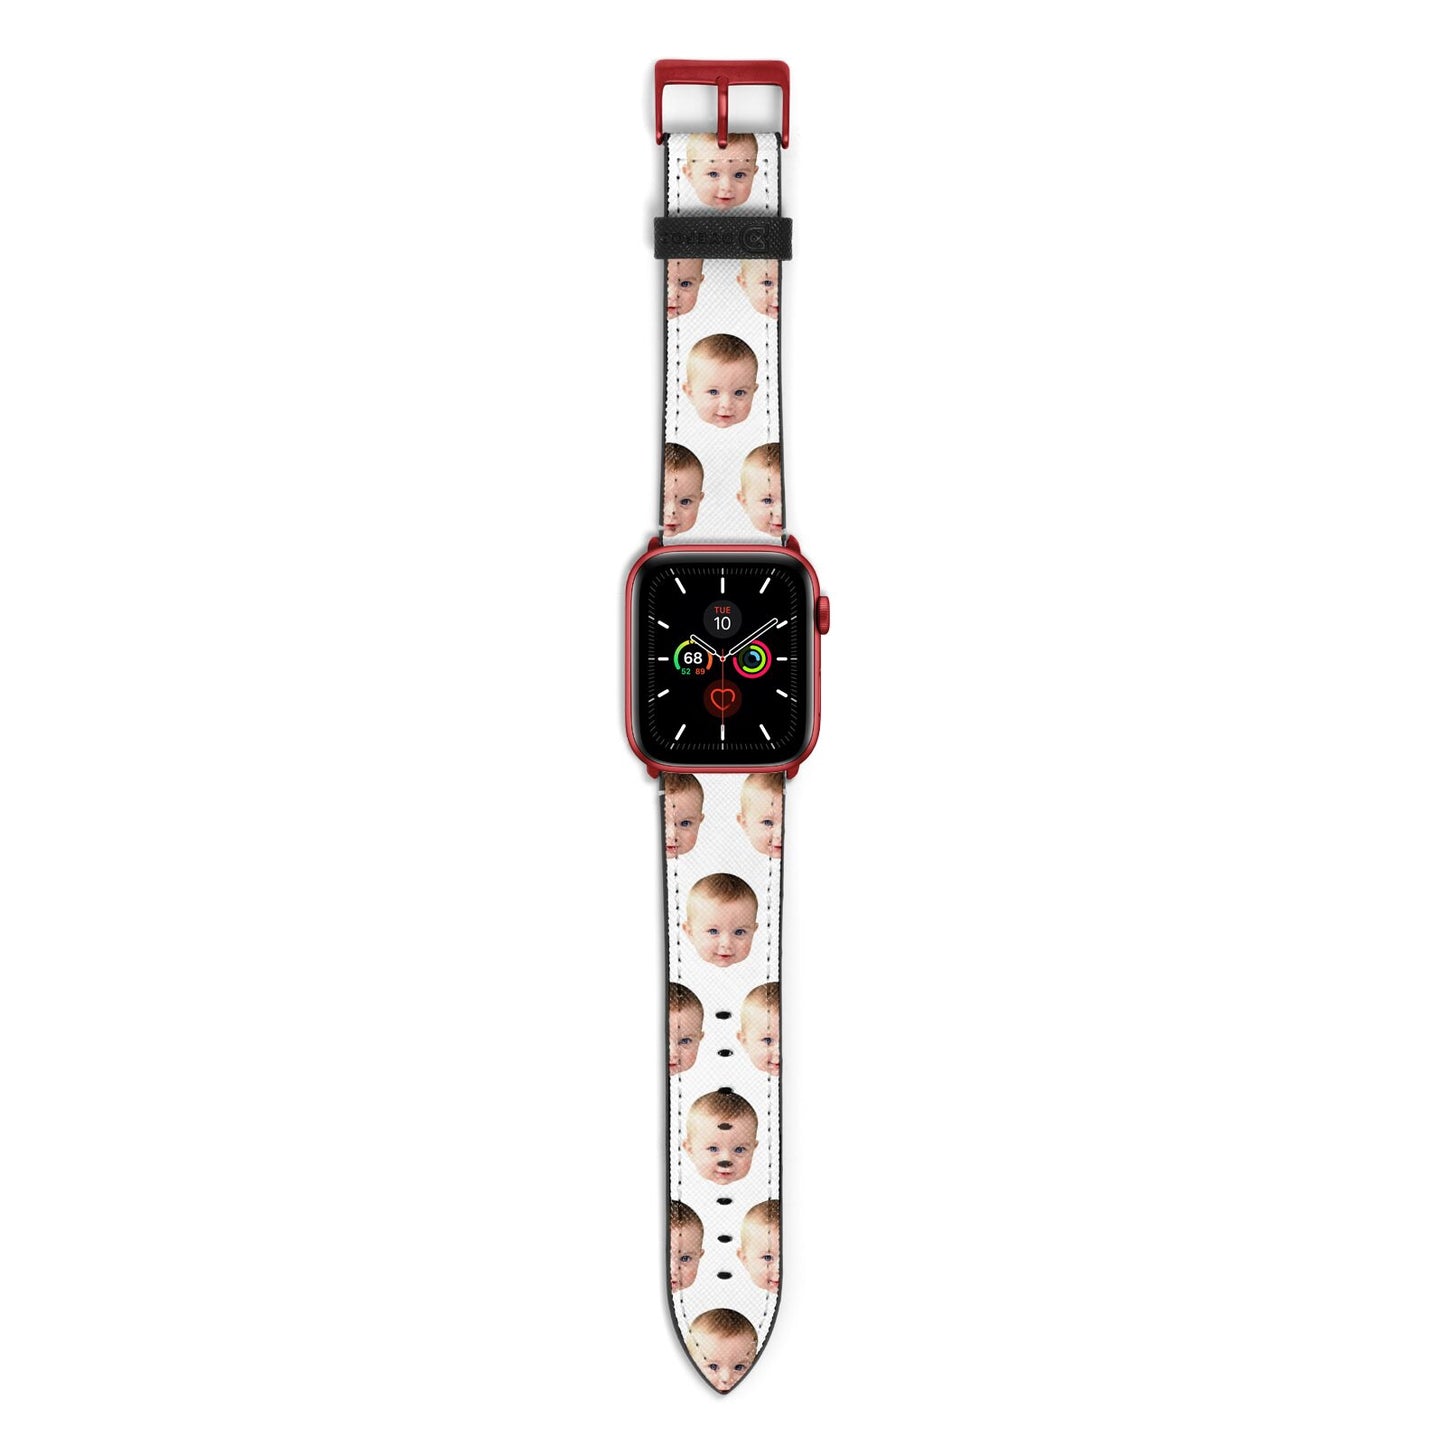 Baby Face Apple Watch Strap with Red Hardware